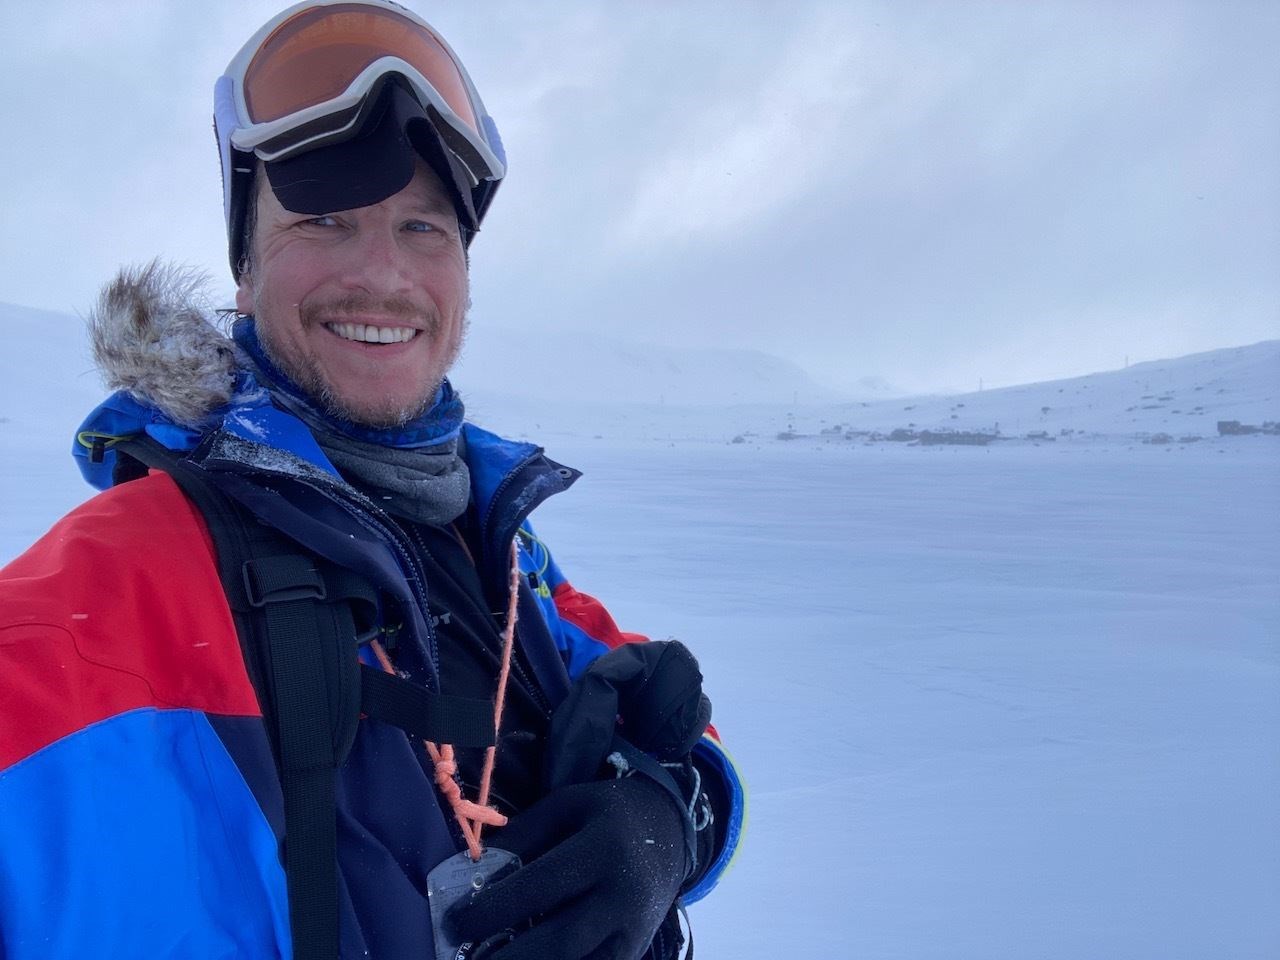 Benjamin Weber will be heading to Greenland this week as part of his preparations for solo trek to South Pole.